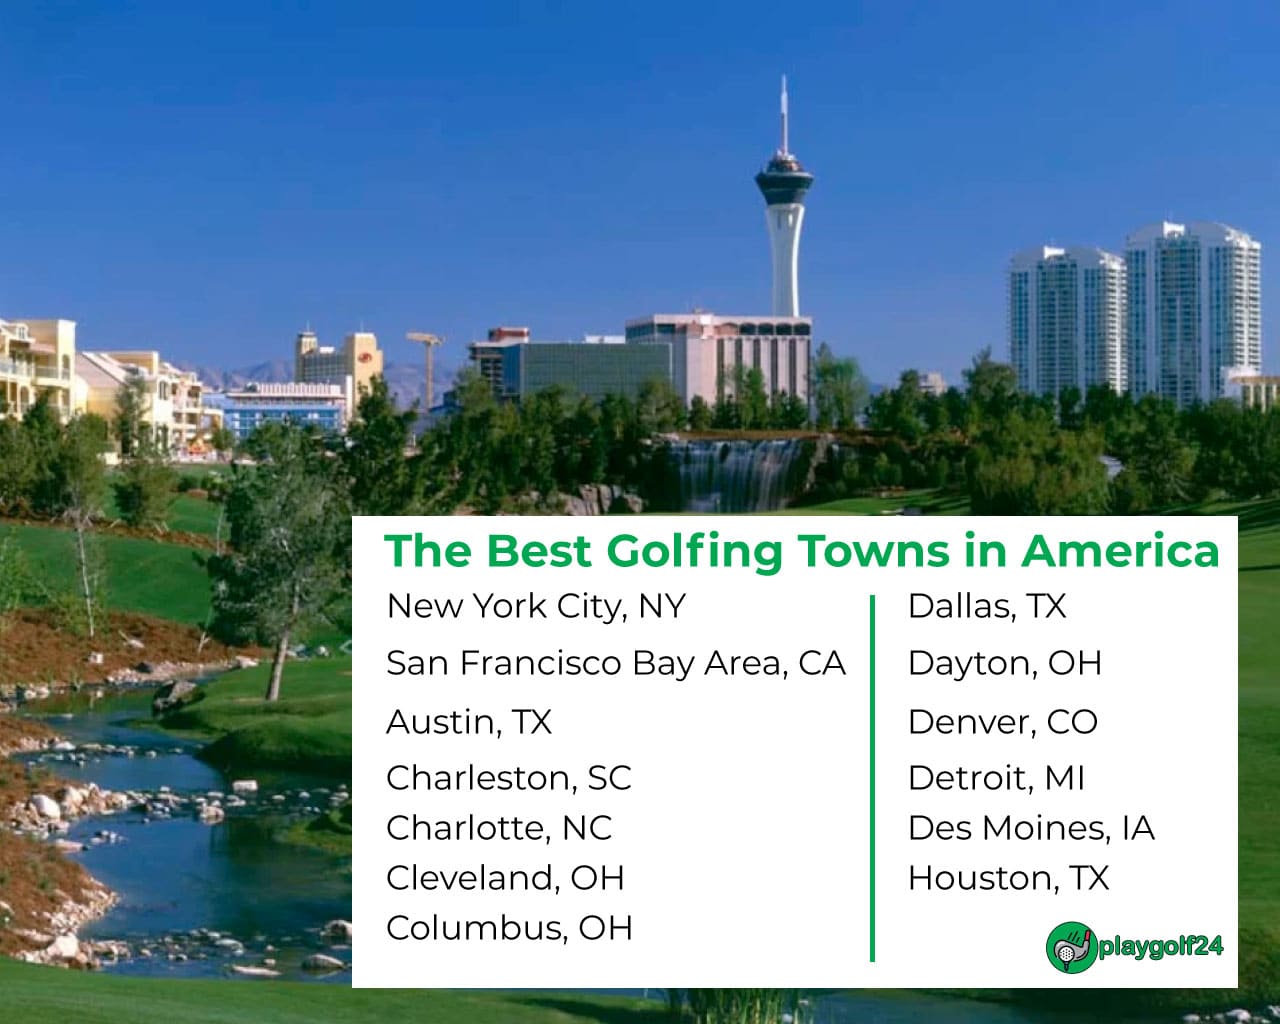 The Best Golfing Towns in America